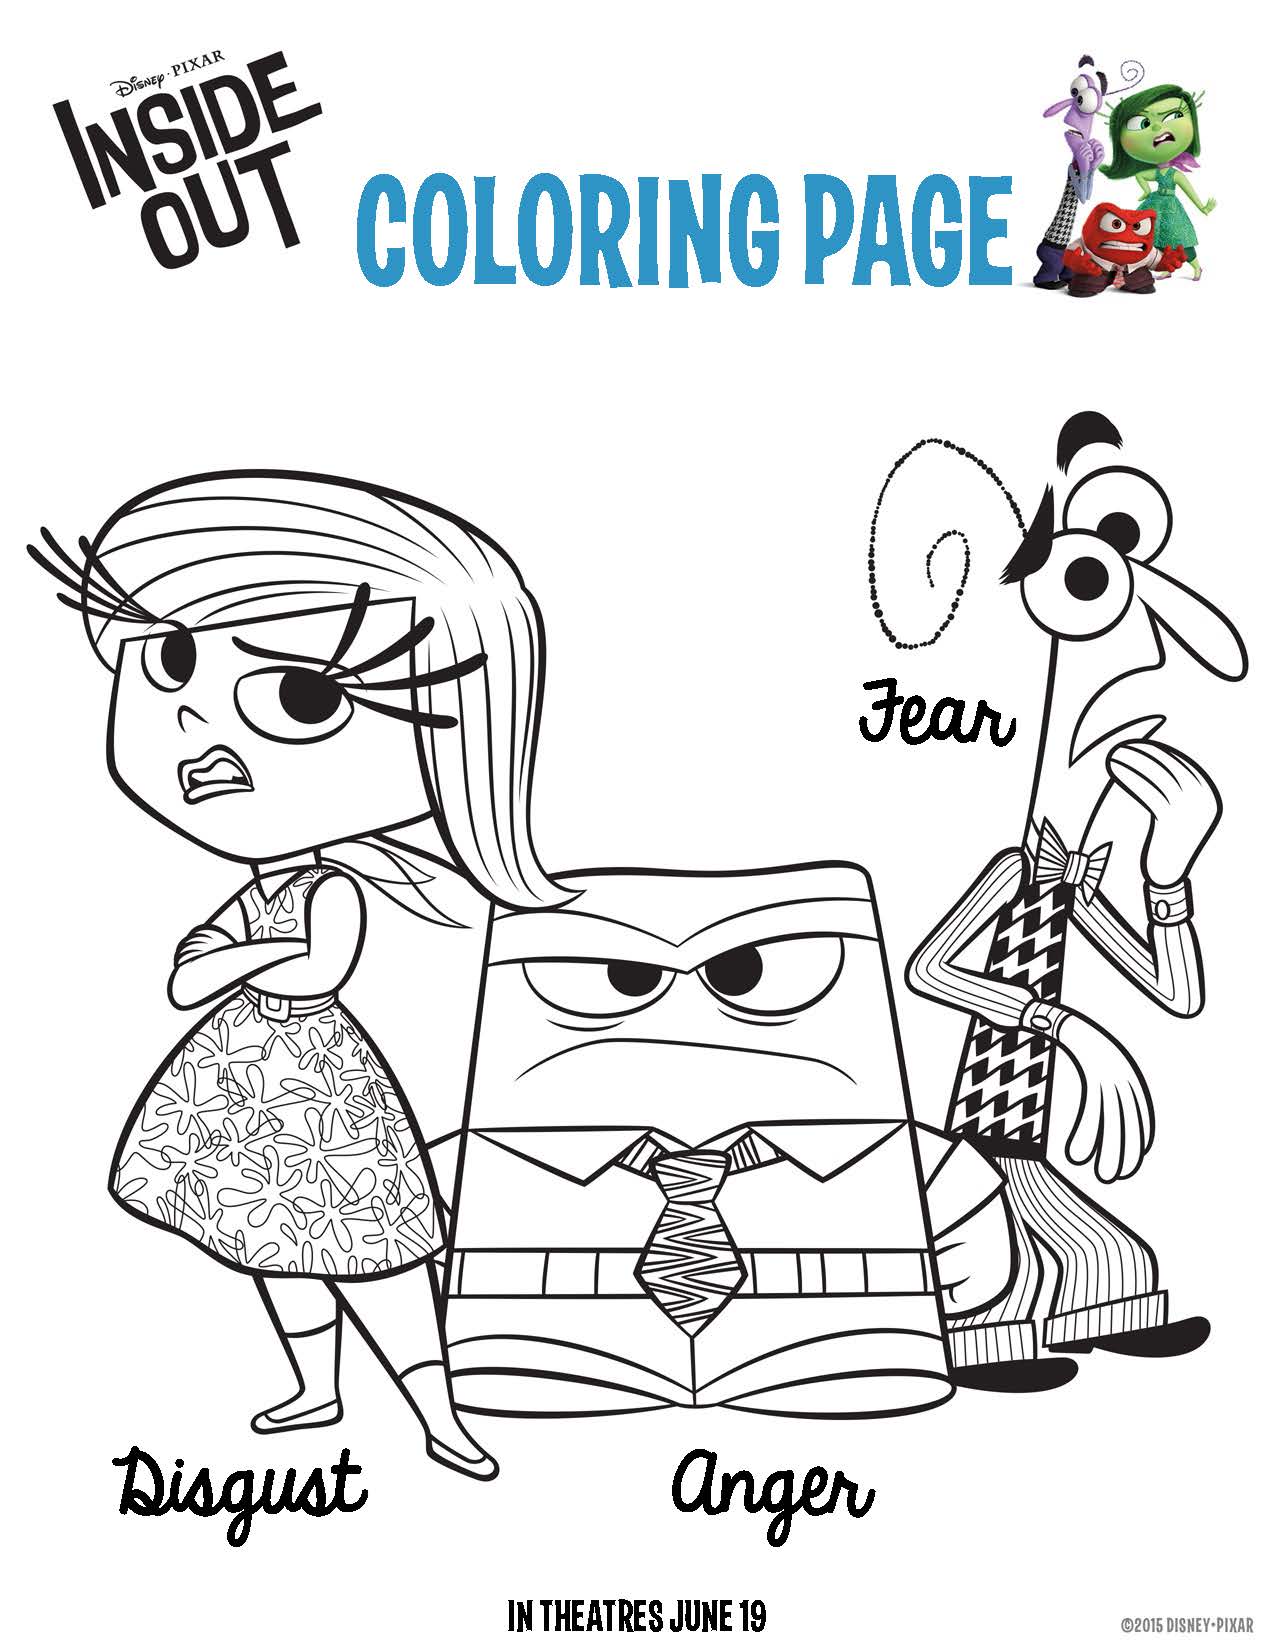 free coloring pages feelings emotions under anger